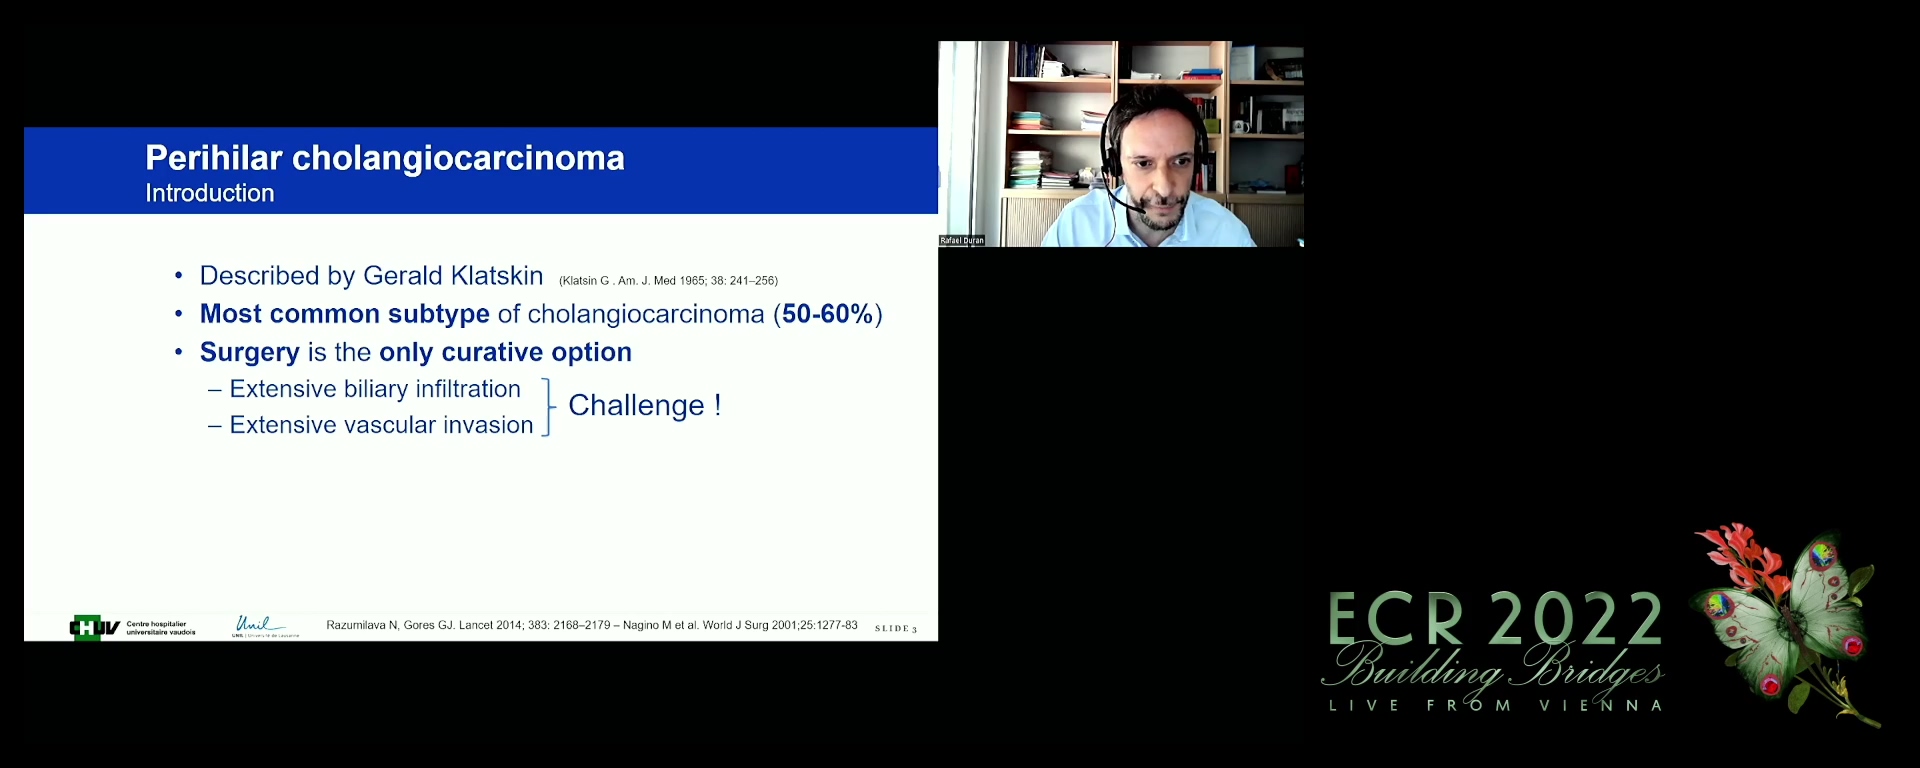 Interventional options for extrahepatic cholangiocarcinoma - Rafael Duran, Lausanne / CH